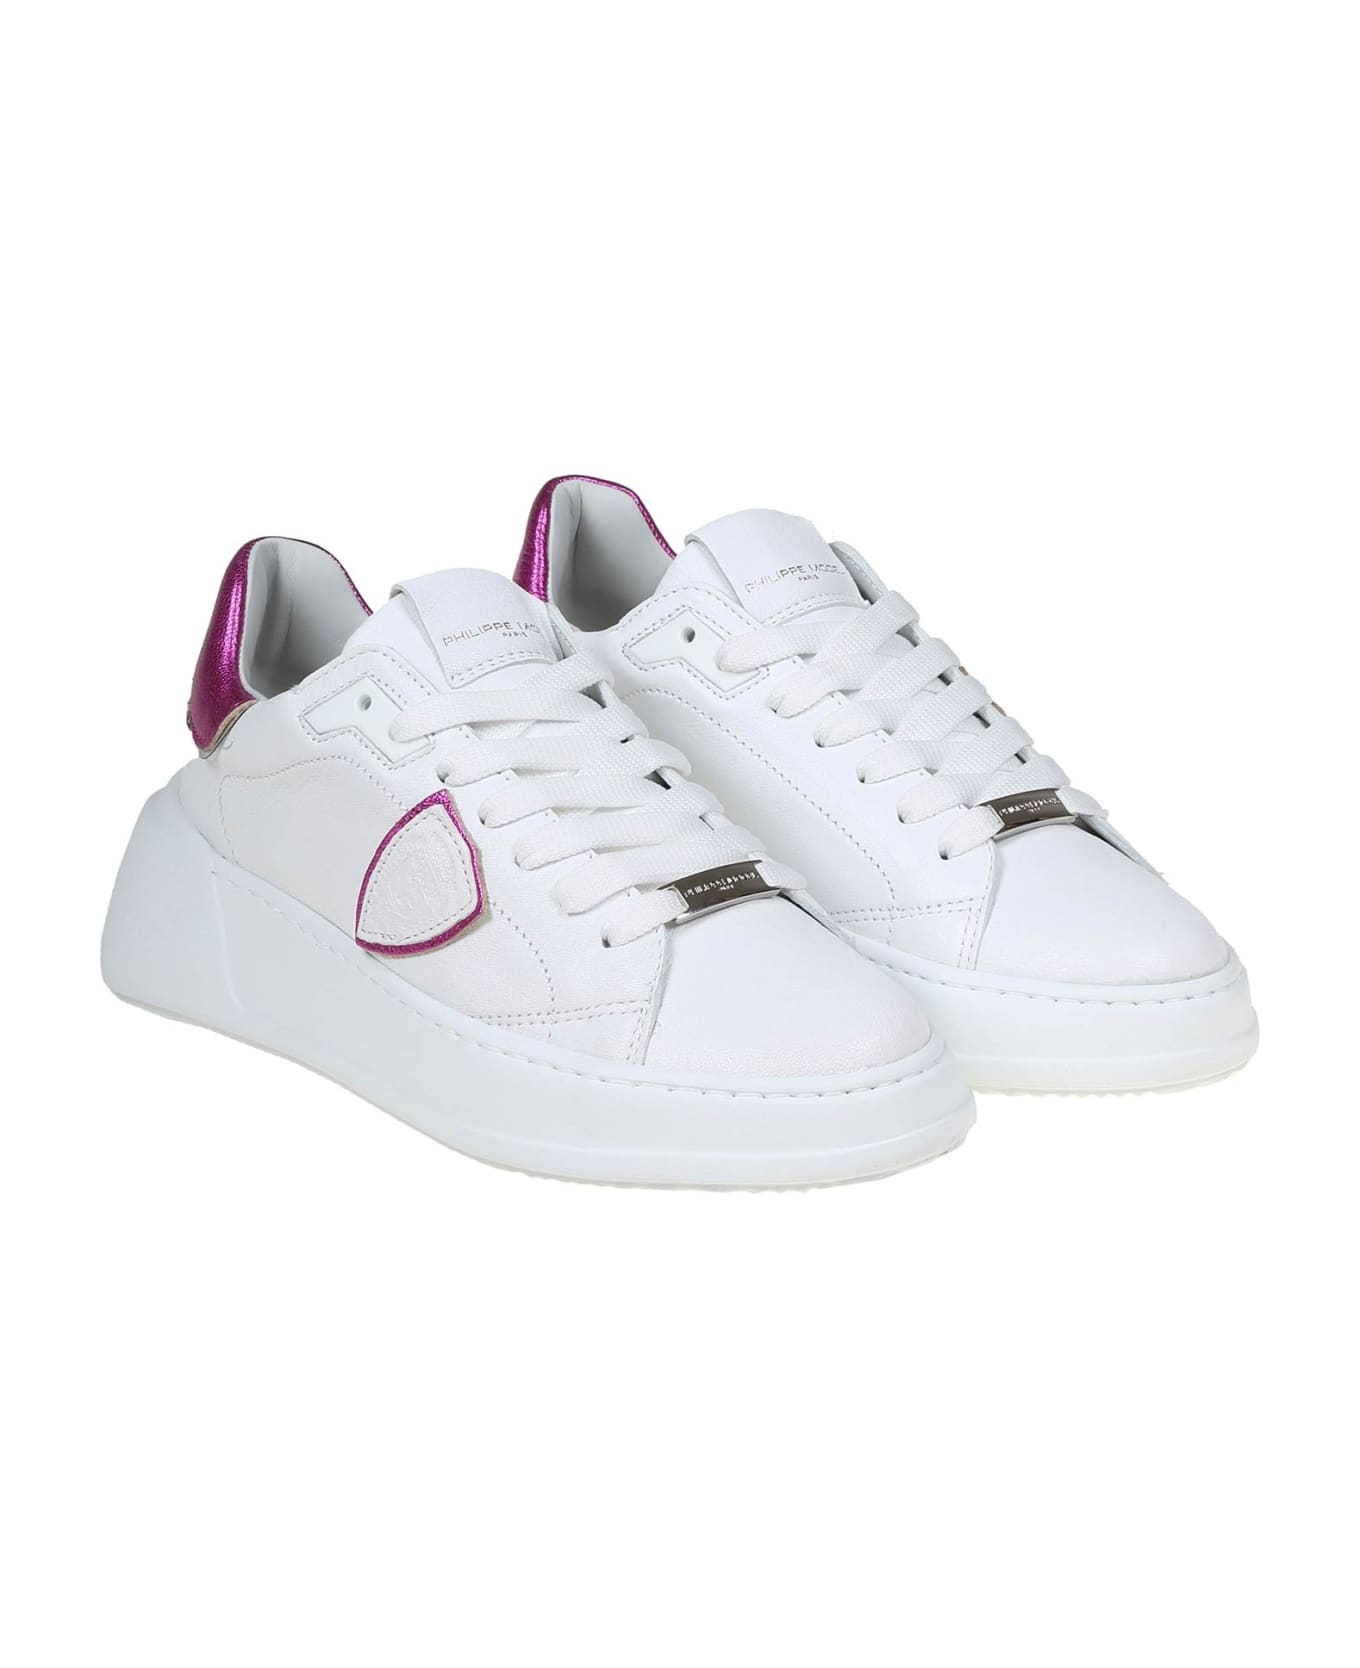 Philippe Model Tres Temple Low In White And Fuchsia Color Leather - Blanc/fucsia